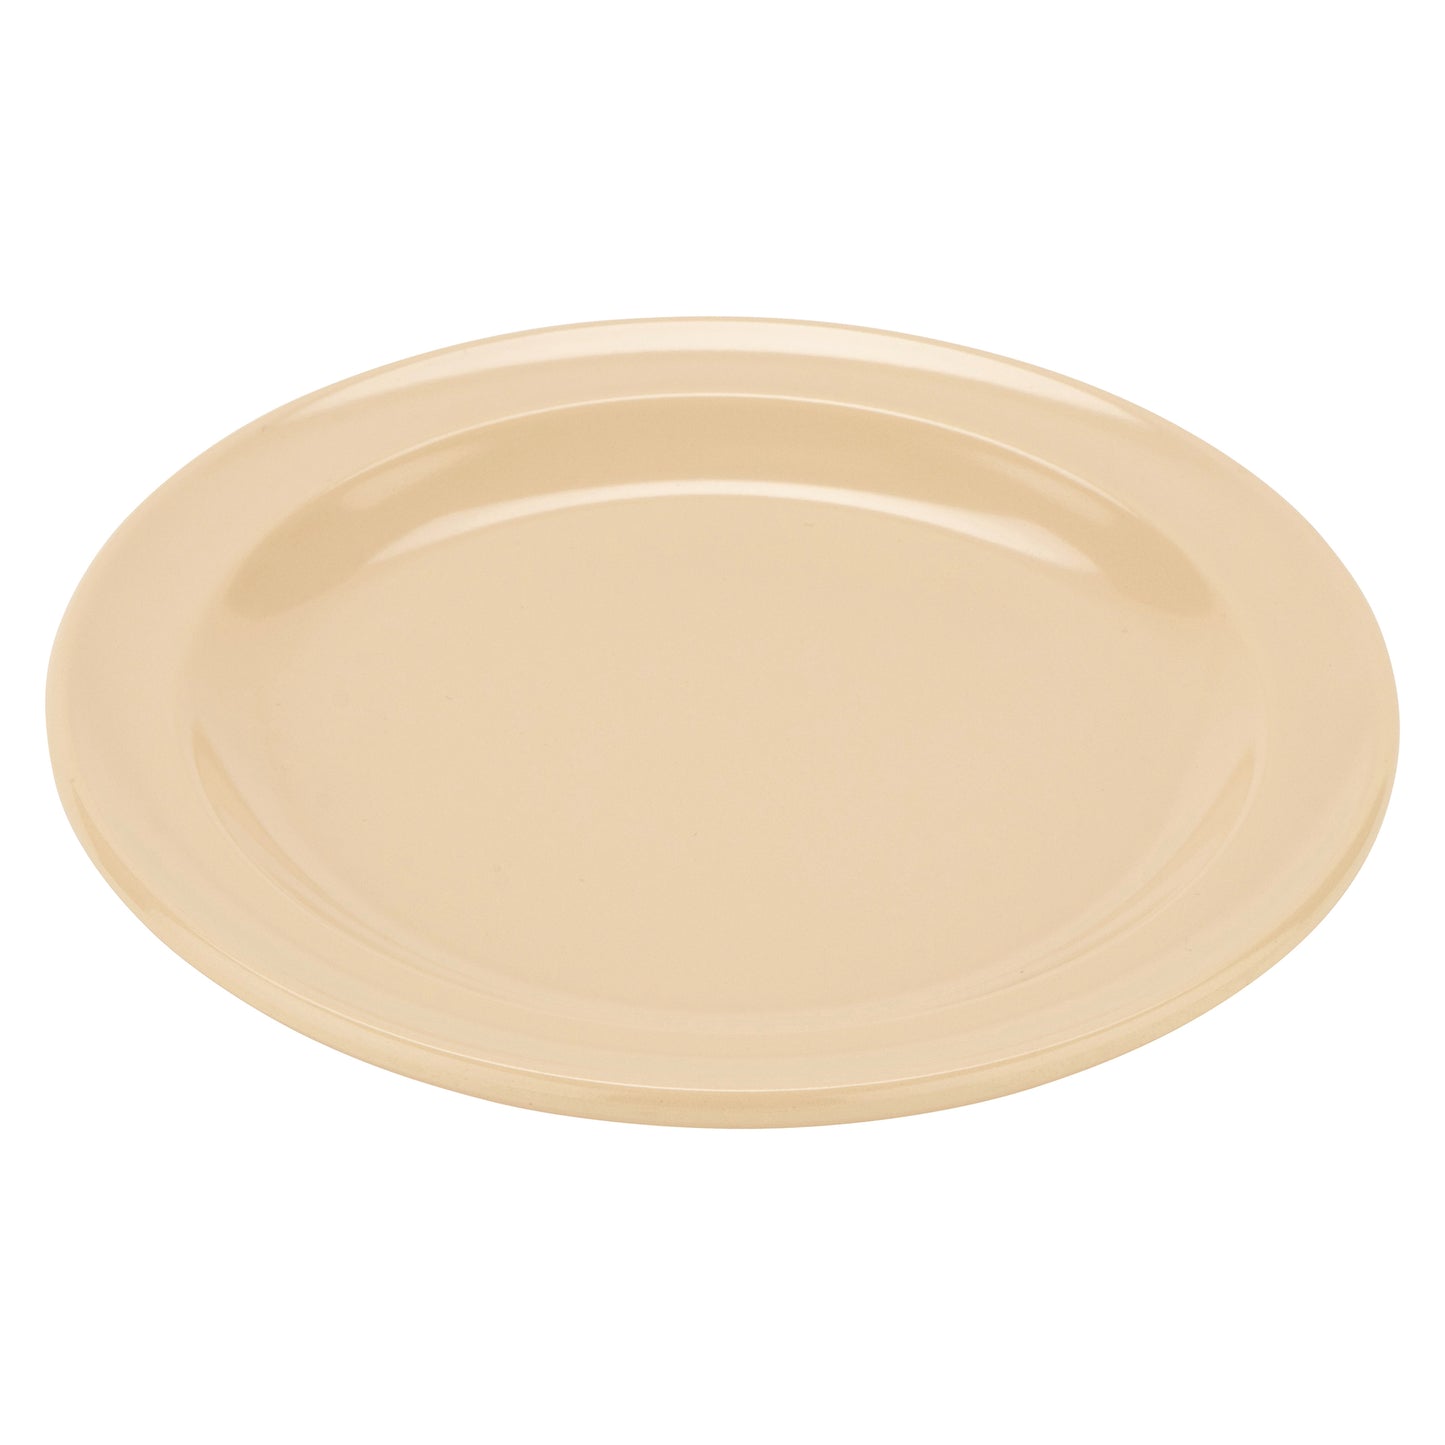 5.5" Round Plate (12 Pack)